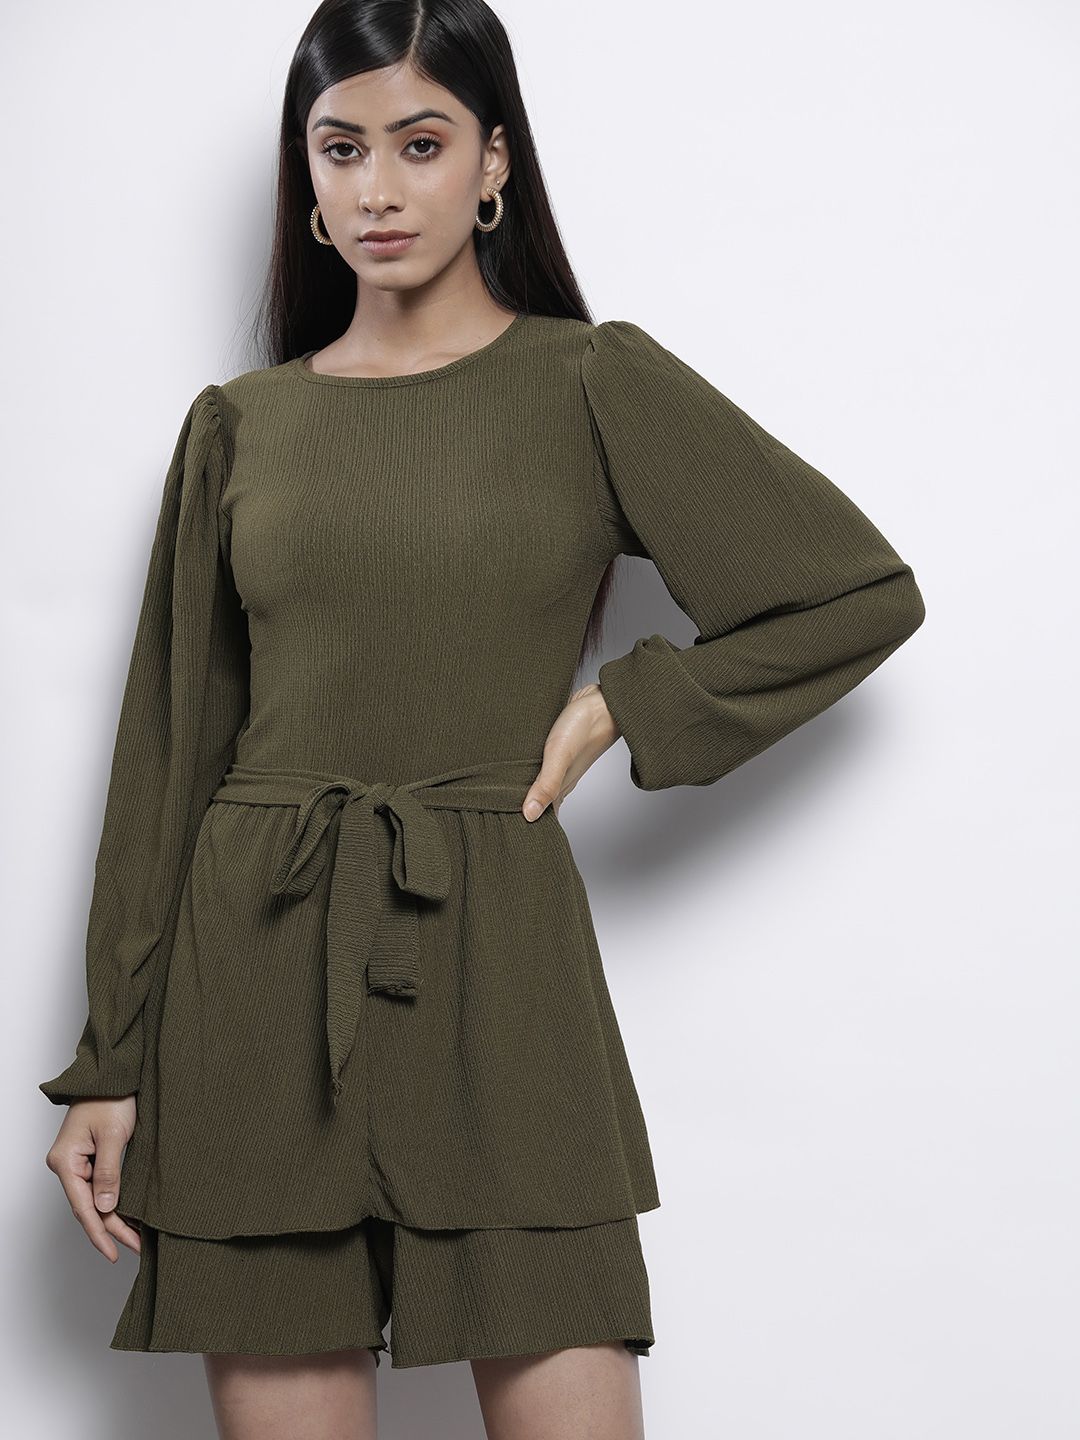 Trendyol Olive Green Self-Design Layered Playsuit with Belt Price in India